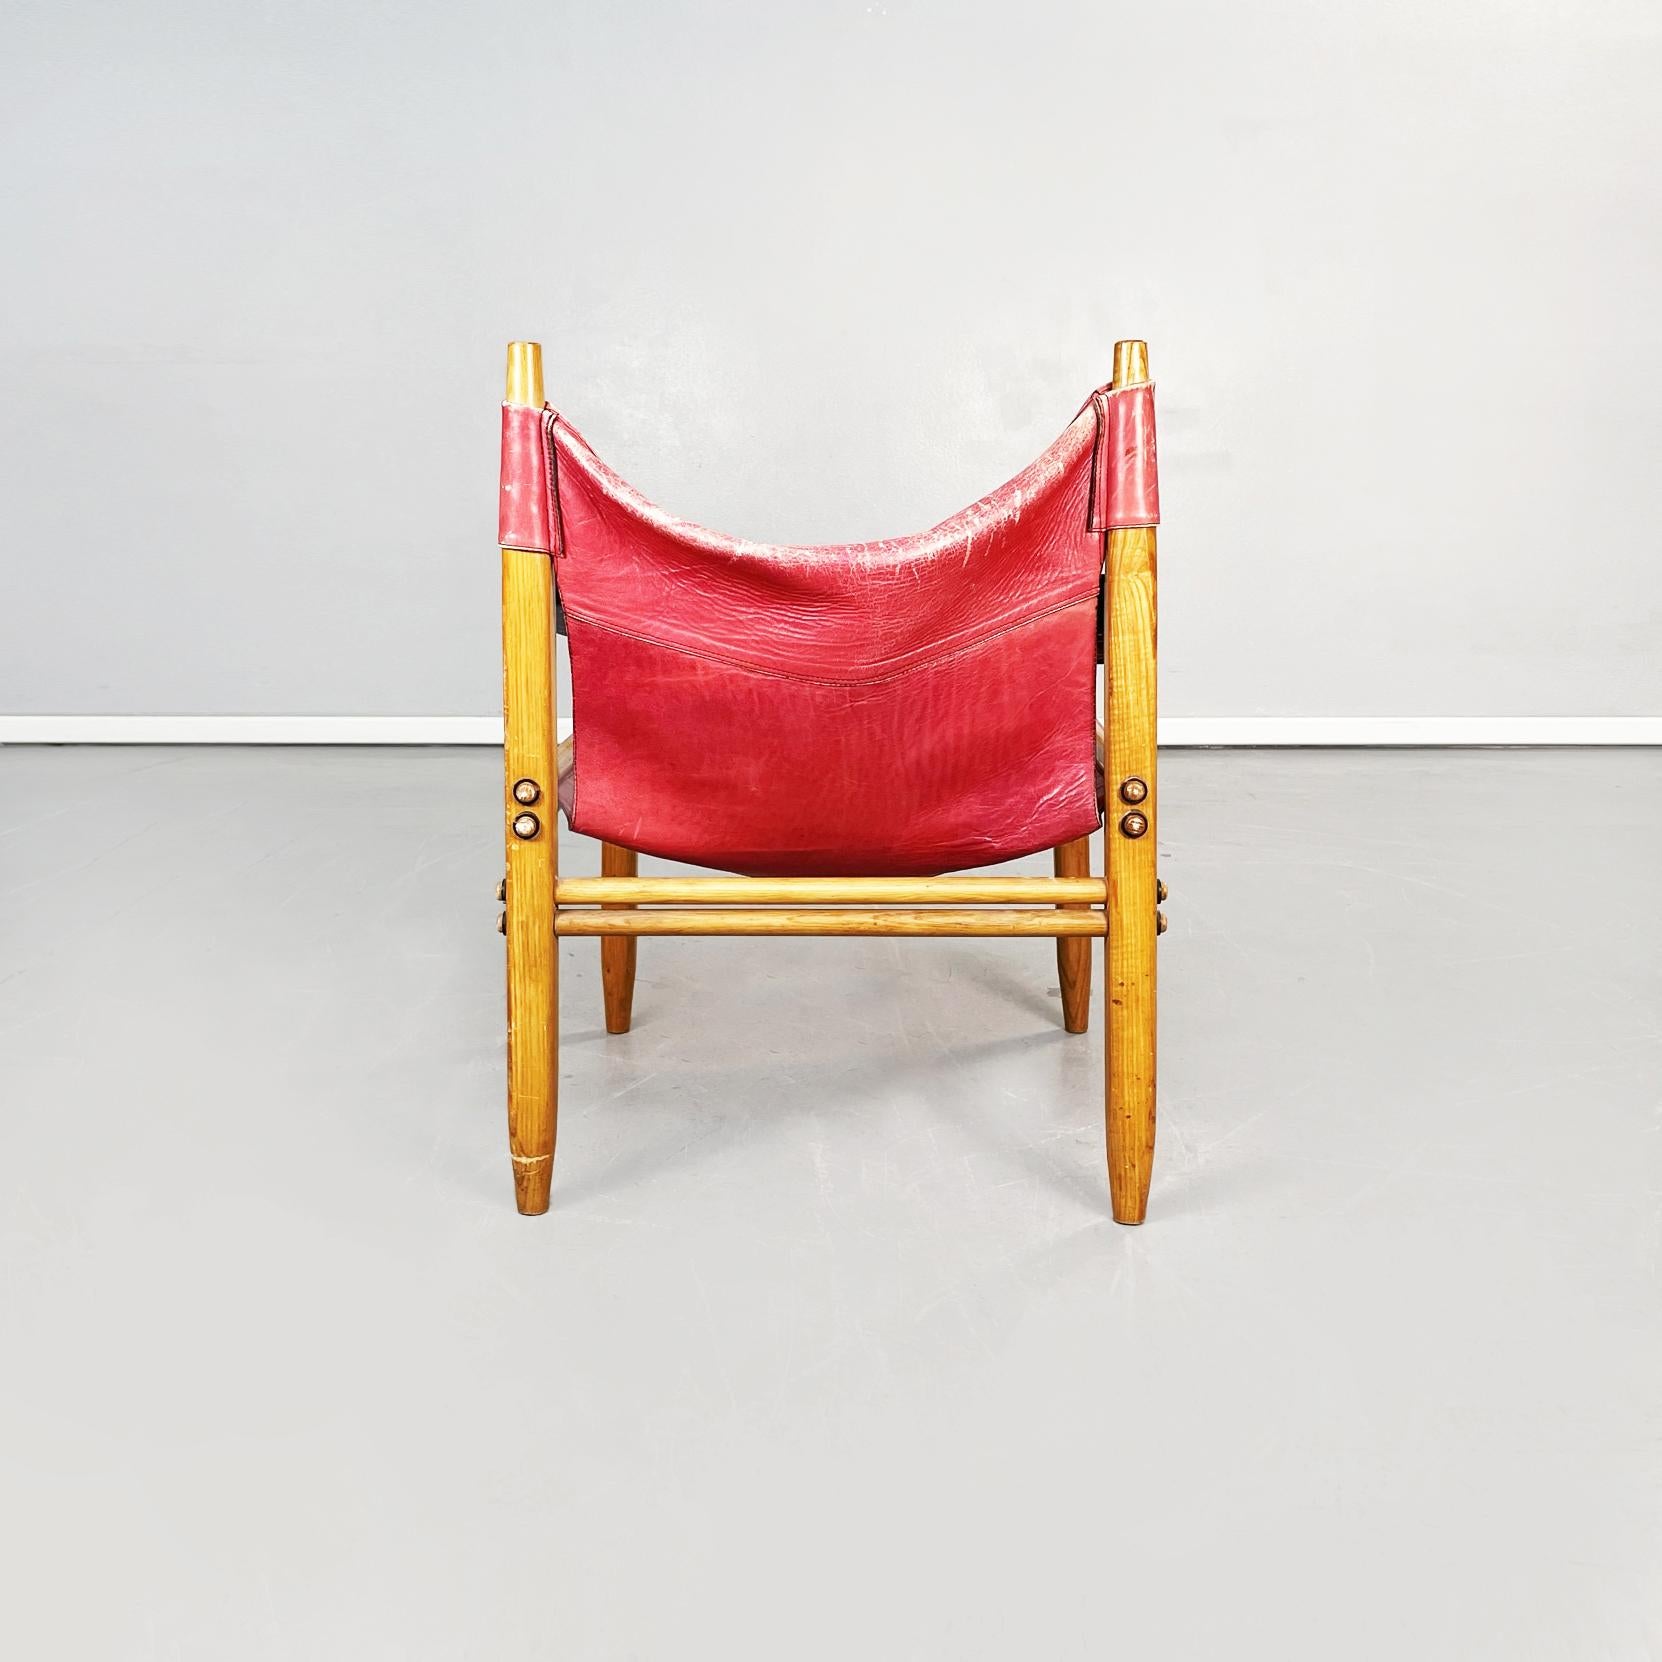 Italian Mid-Century Leather N Wood Armchair Oasi 85 by Legler for Zanotta, 1960s In Good Condition For Sale In MIlano, IT